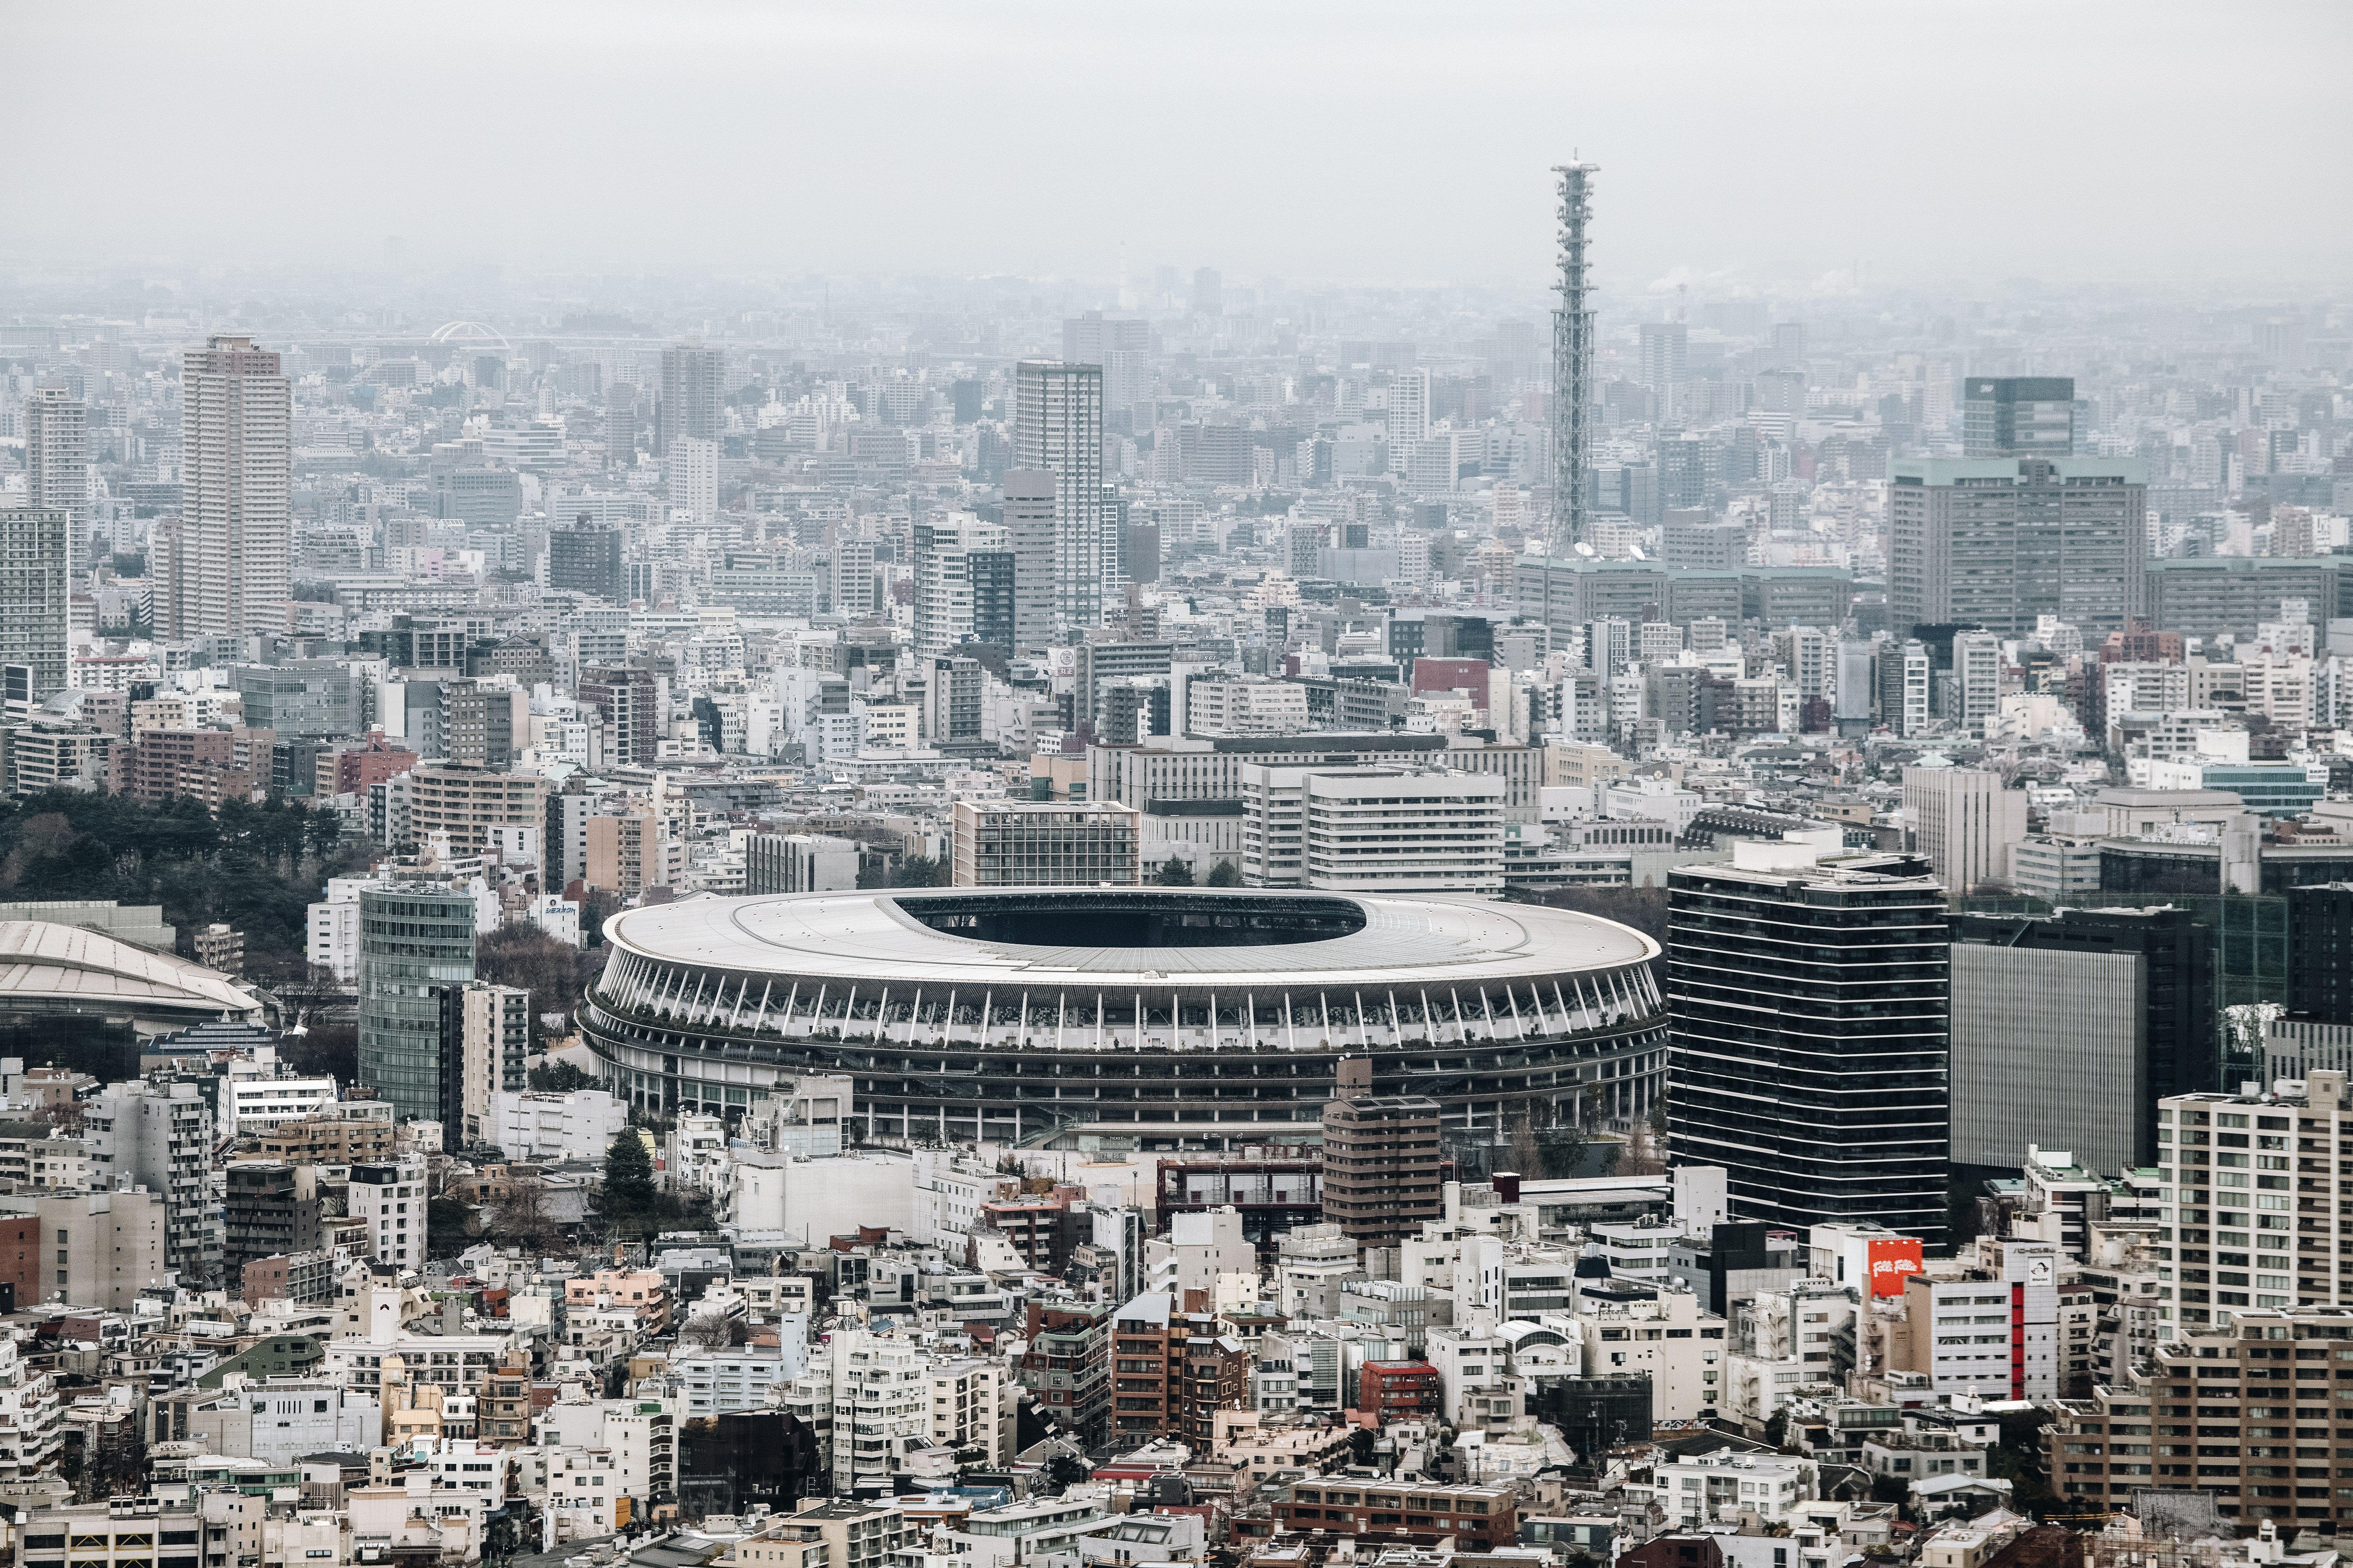 Tokyo Olympics: All the Ways the 2021 Games Could Pan Out. Condé Nast Traveler